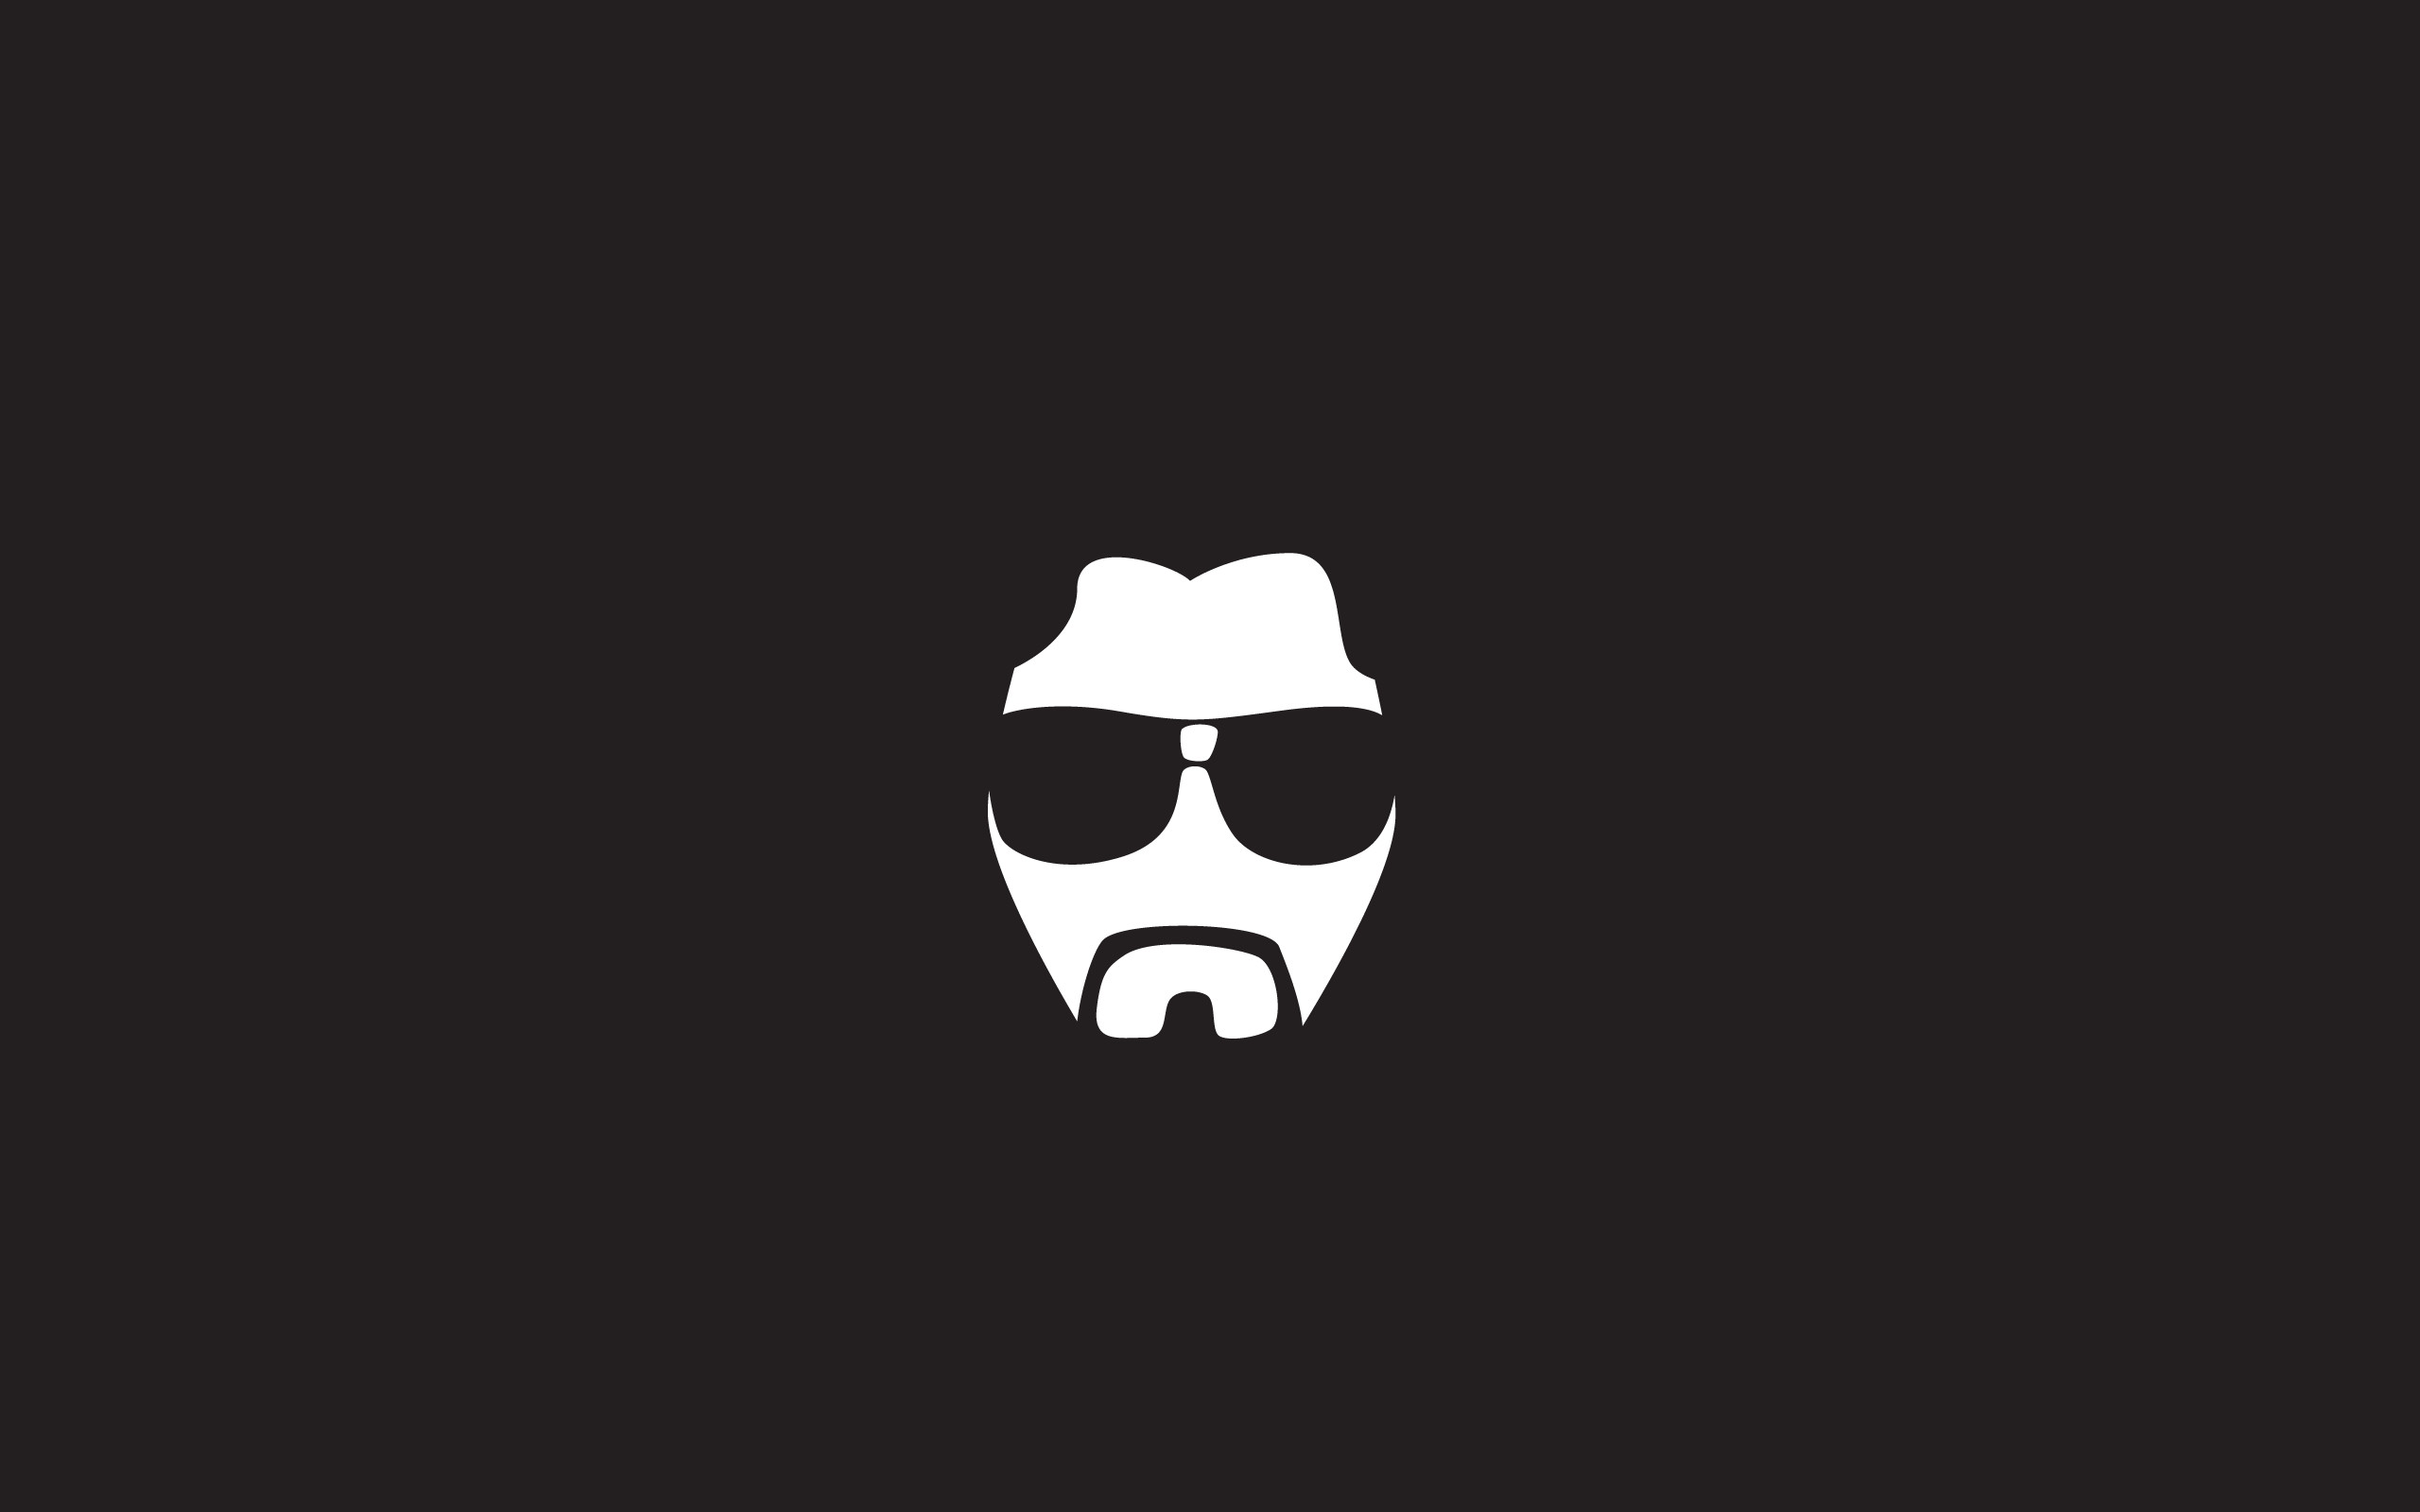 cool-simple-and-minimalist-desktop-wallpaper -the_dude_the_big_lebowski-cooked